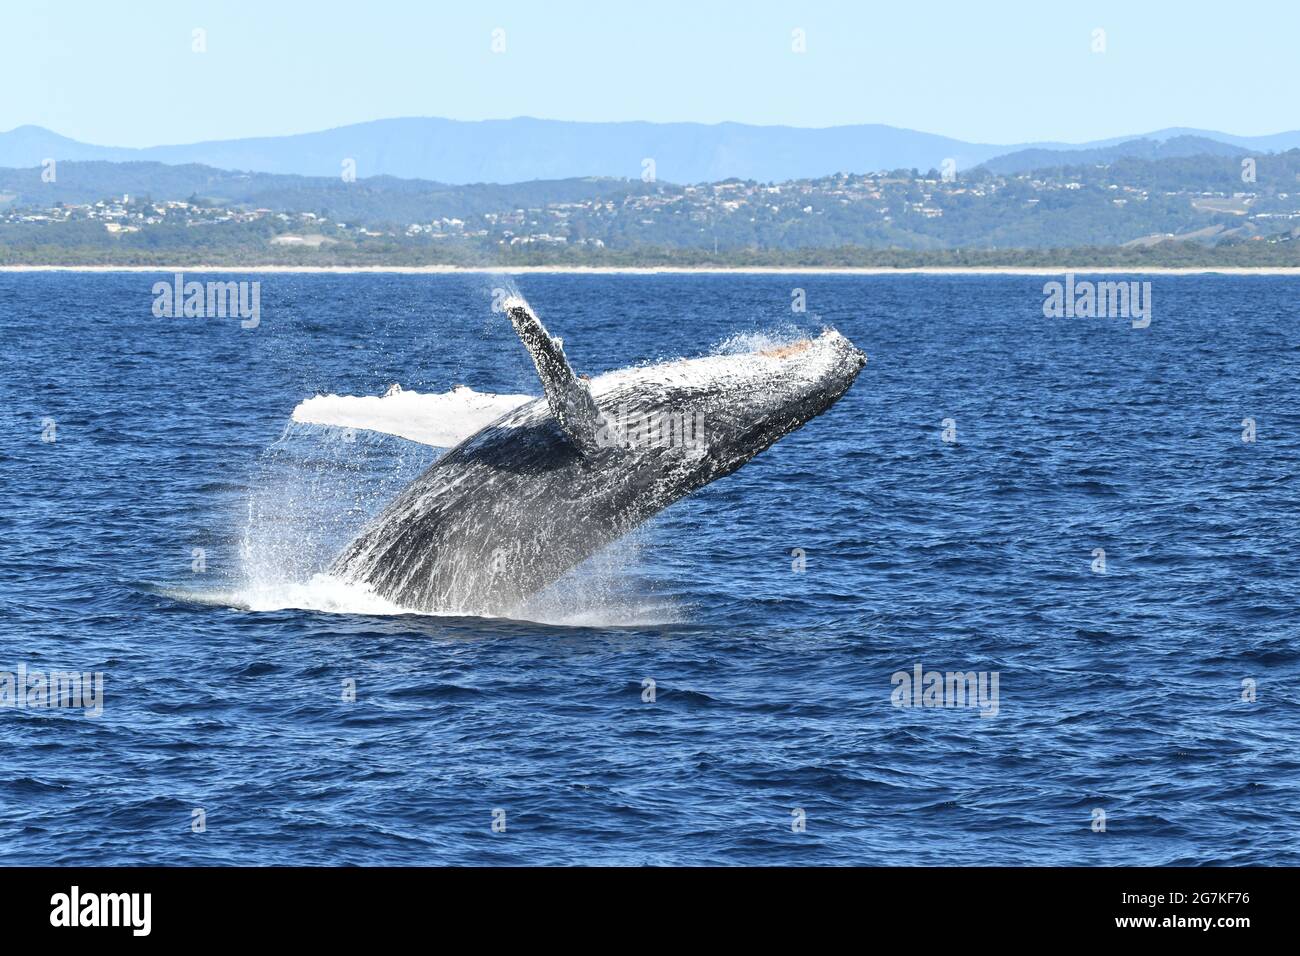 Side view of whale breaching in the ocean while about to land back in the water. Stock Photo